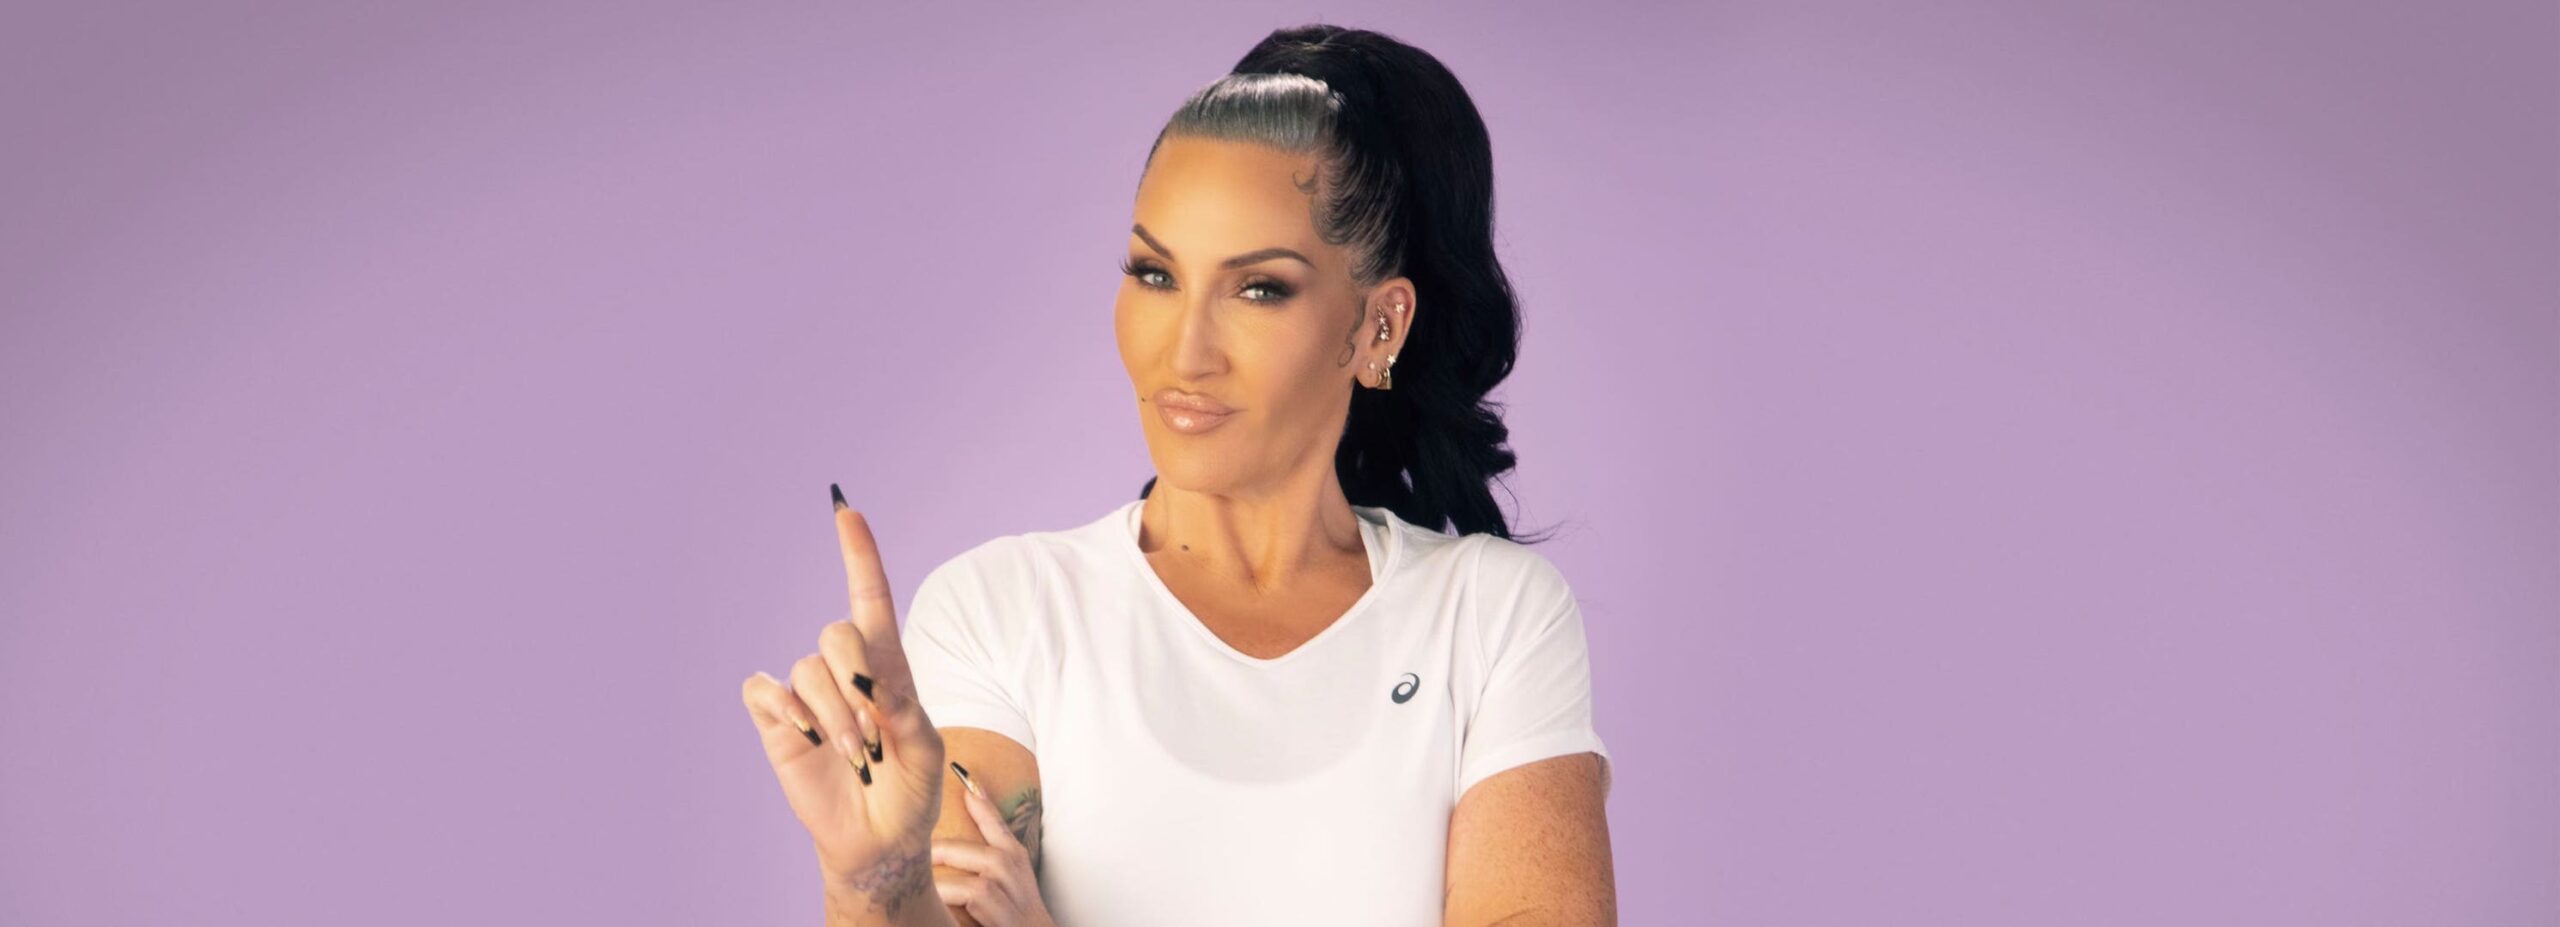 Michelle visage has finally found the joy in working out for her mind, body and soul